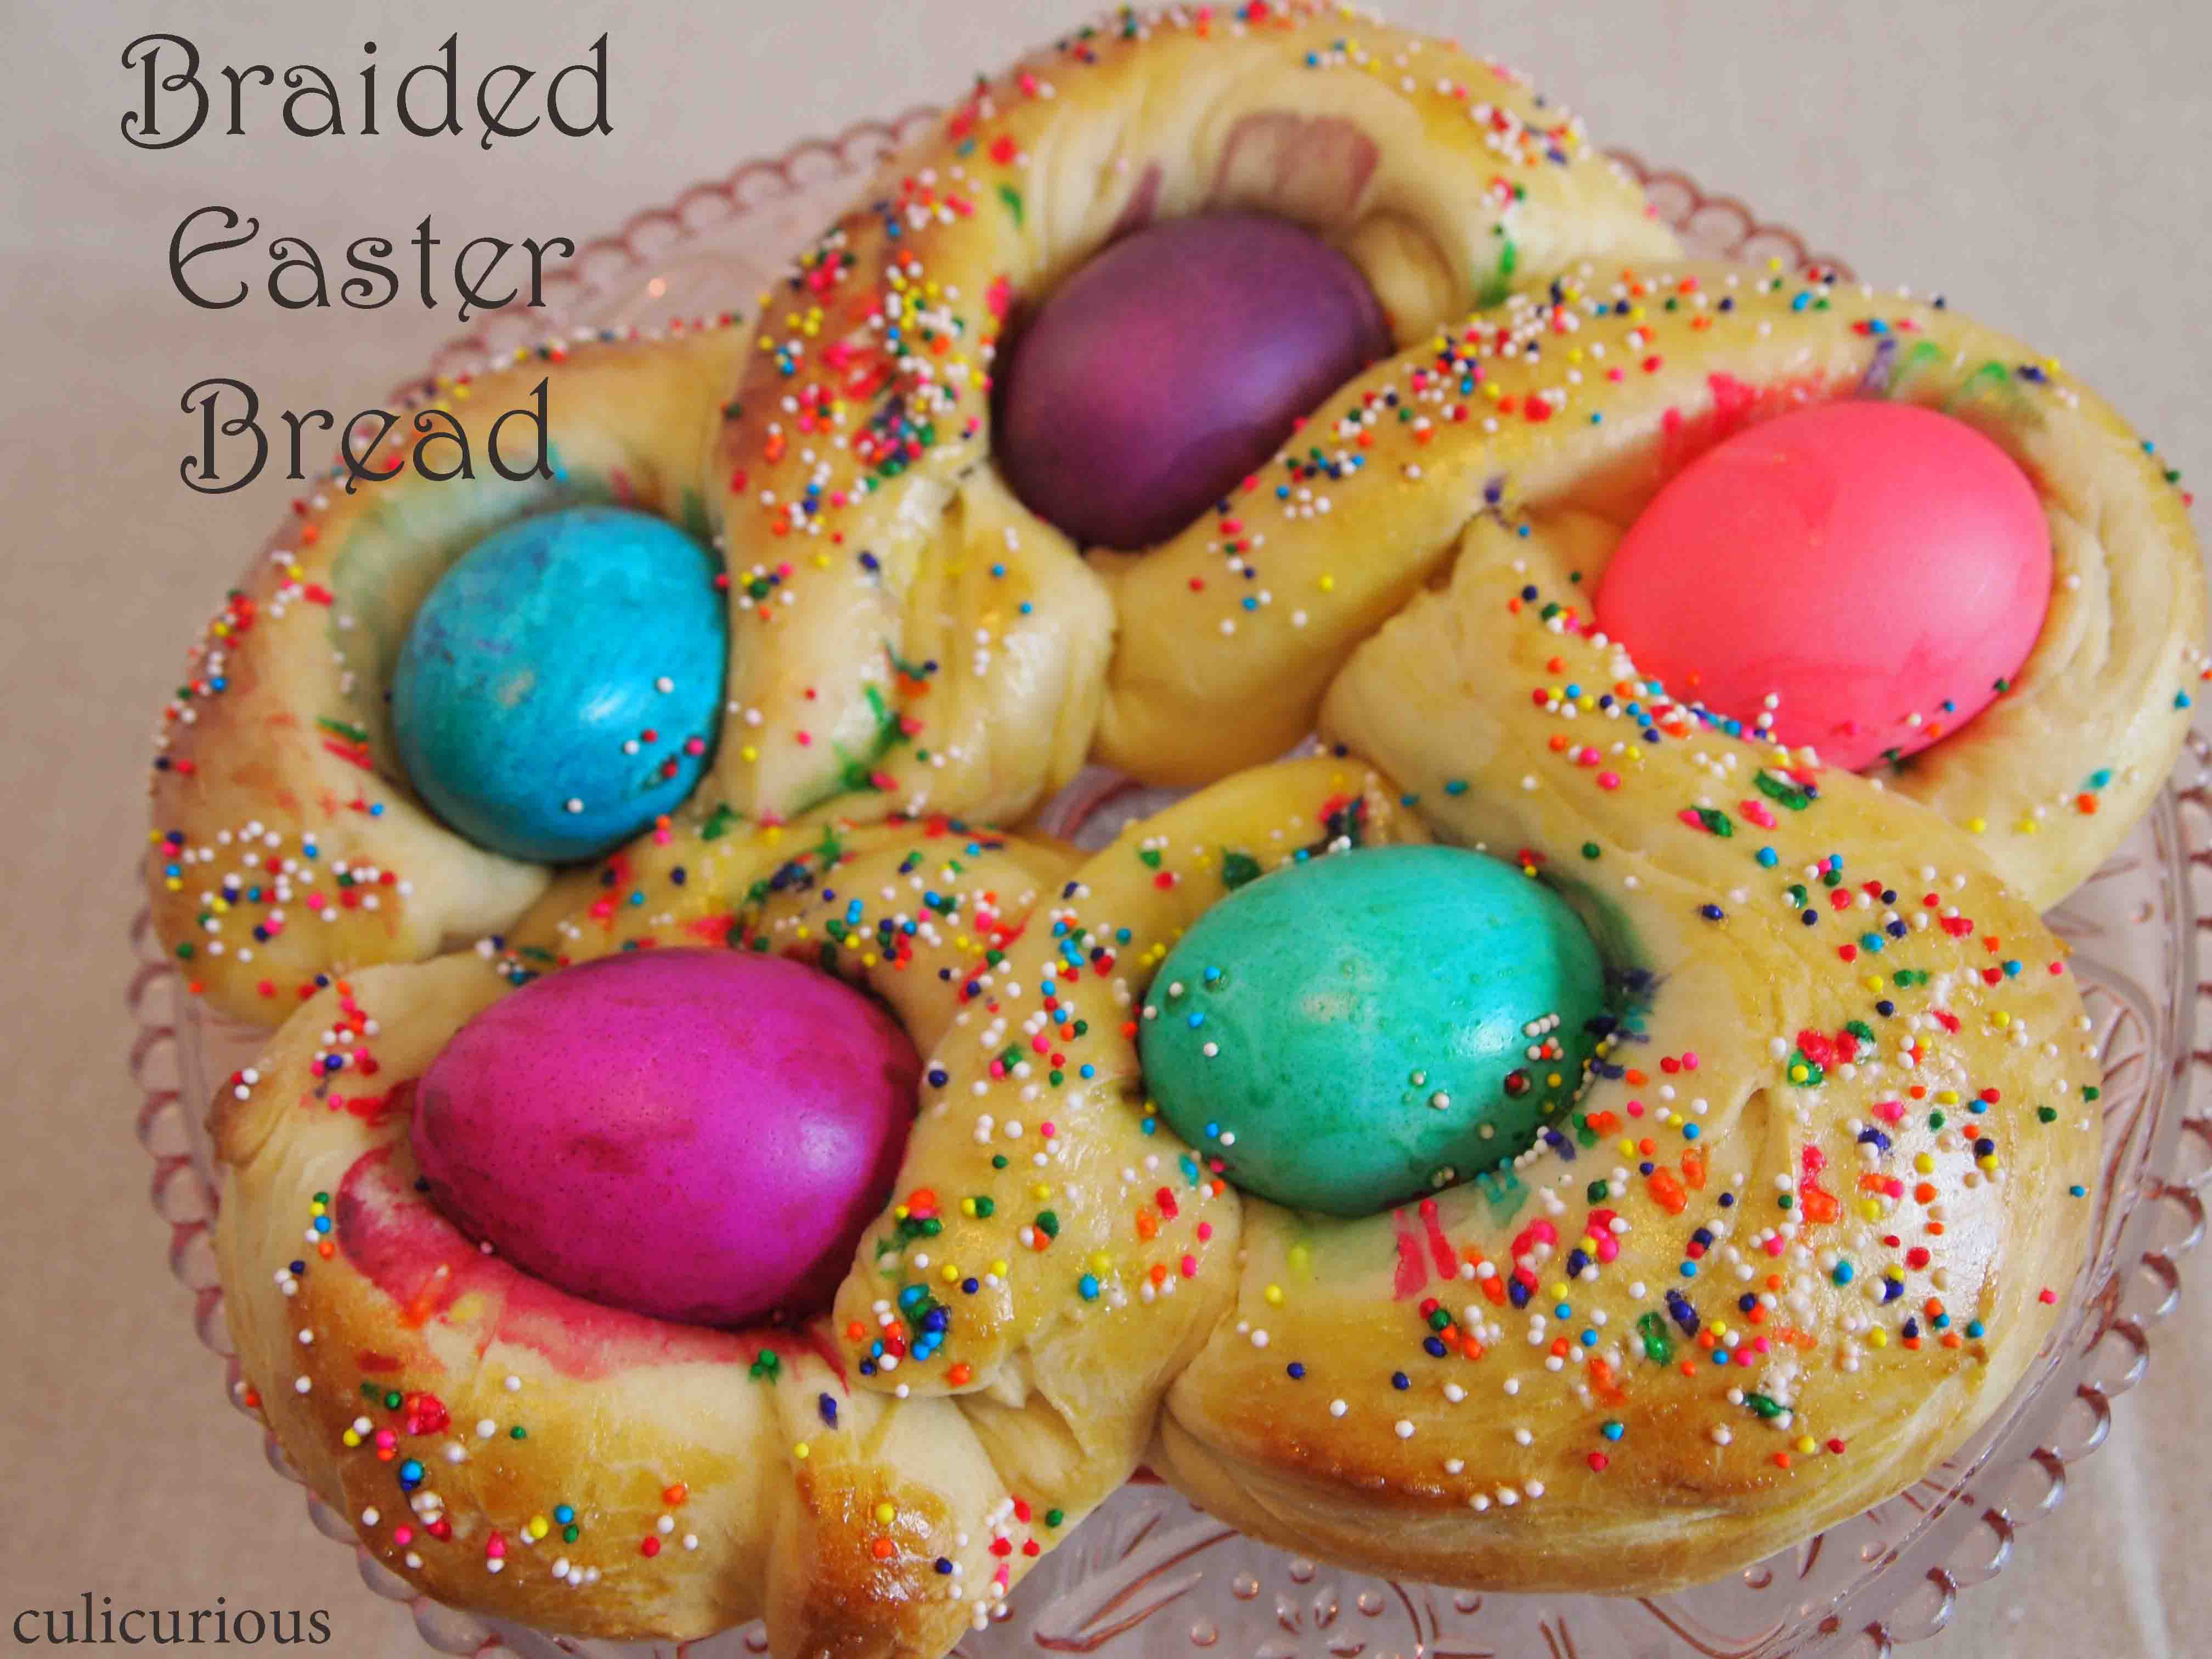 Recipe For Easter Bread
 Braided Easter Bread Recipe